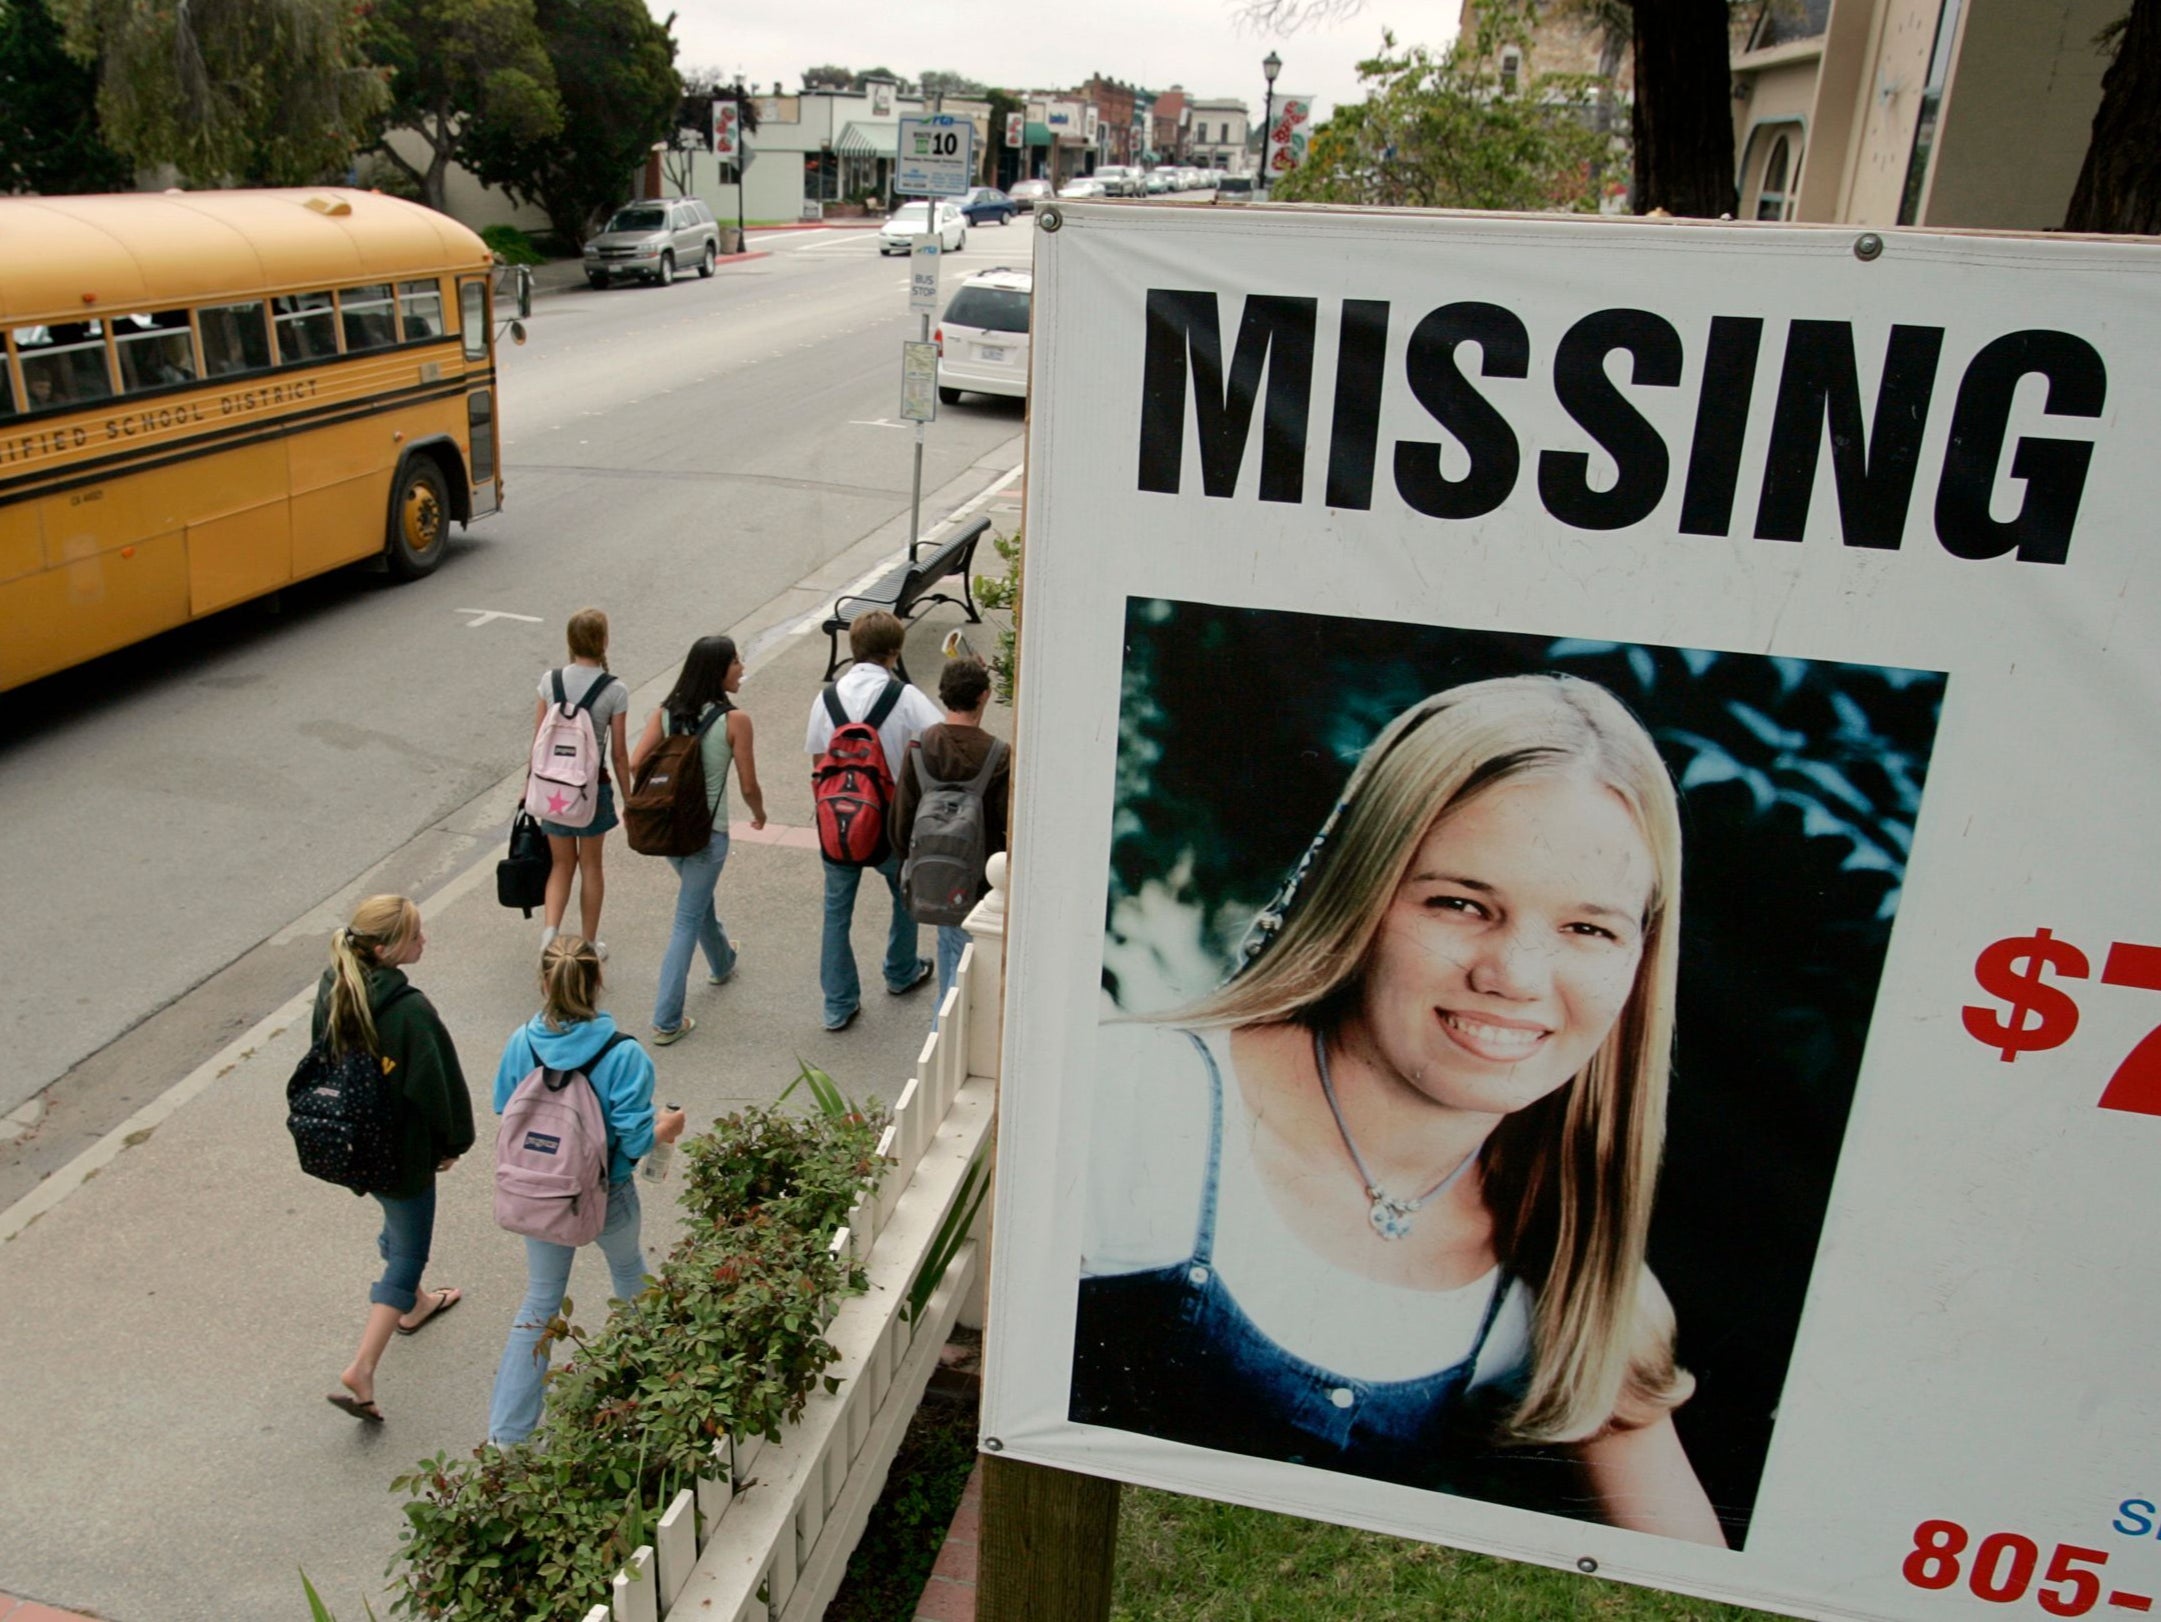 A sign raises public awareness in the case of missing student Kristin Smart in the California central coast town of Arroyo Grande in May 2006